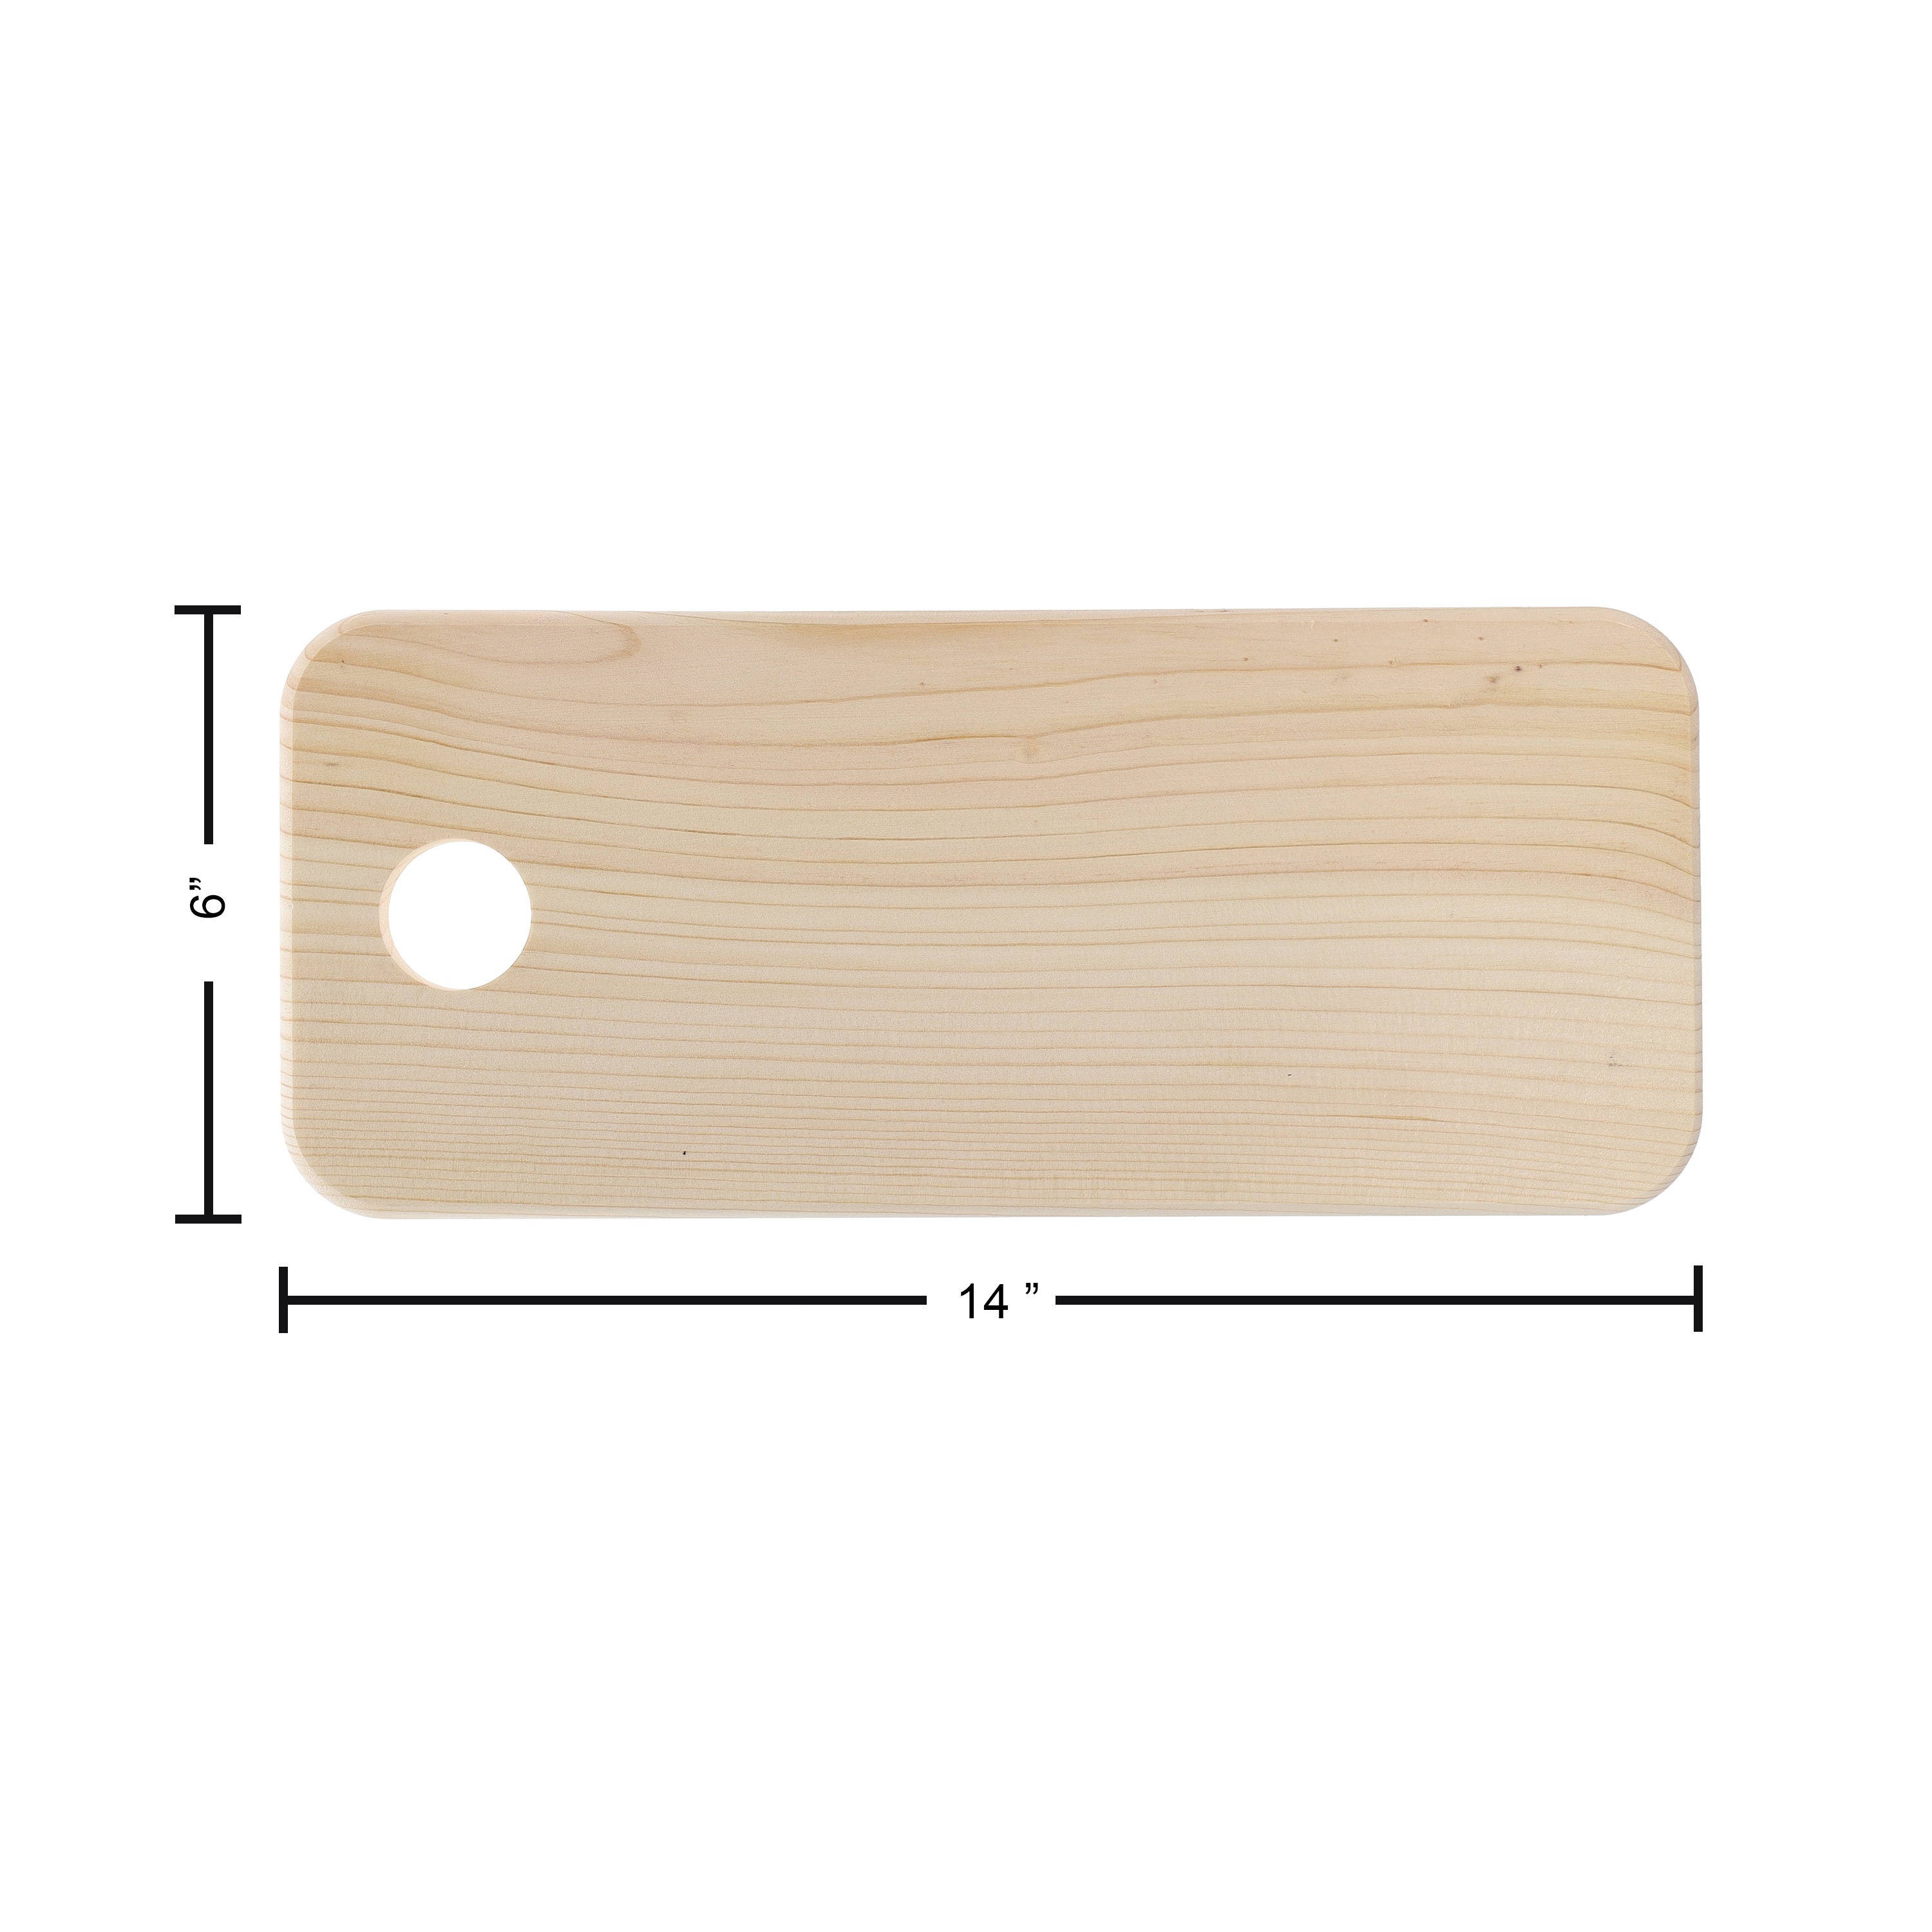 Good Wood By Leisure Arts Rectangle Board Pine 14x 6x .75 - Leisure Arts